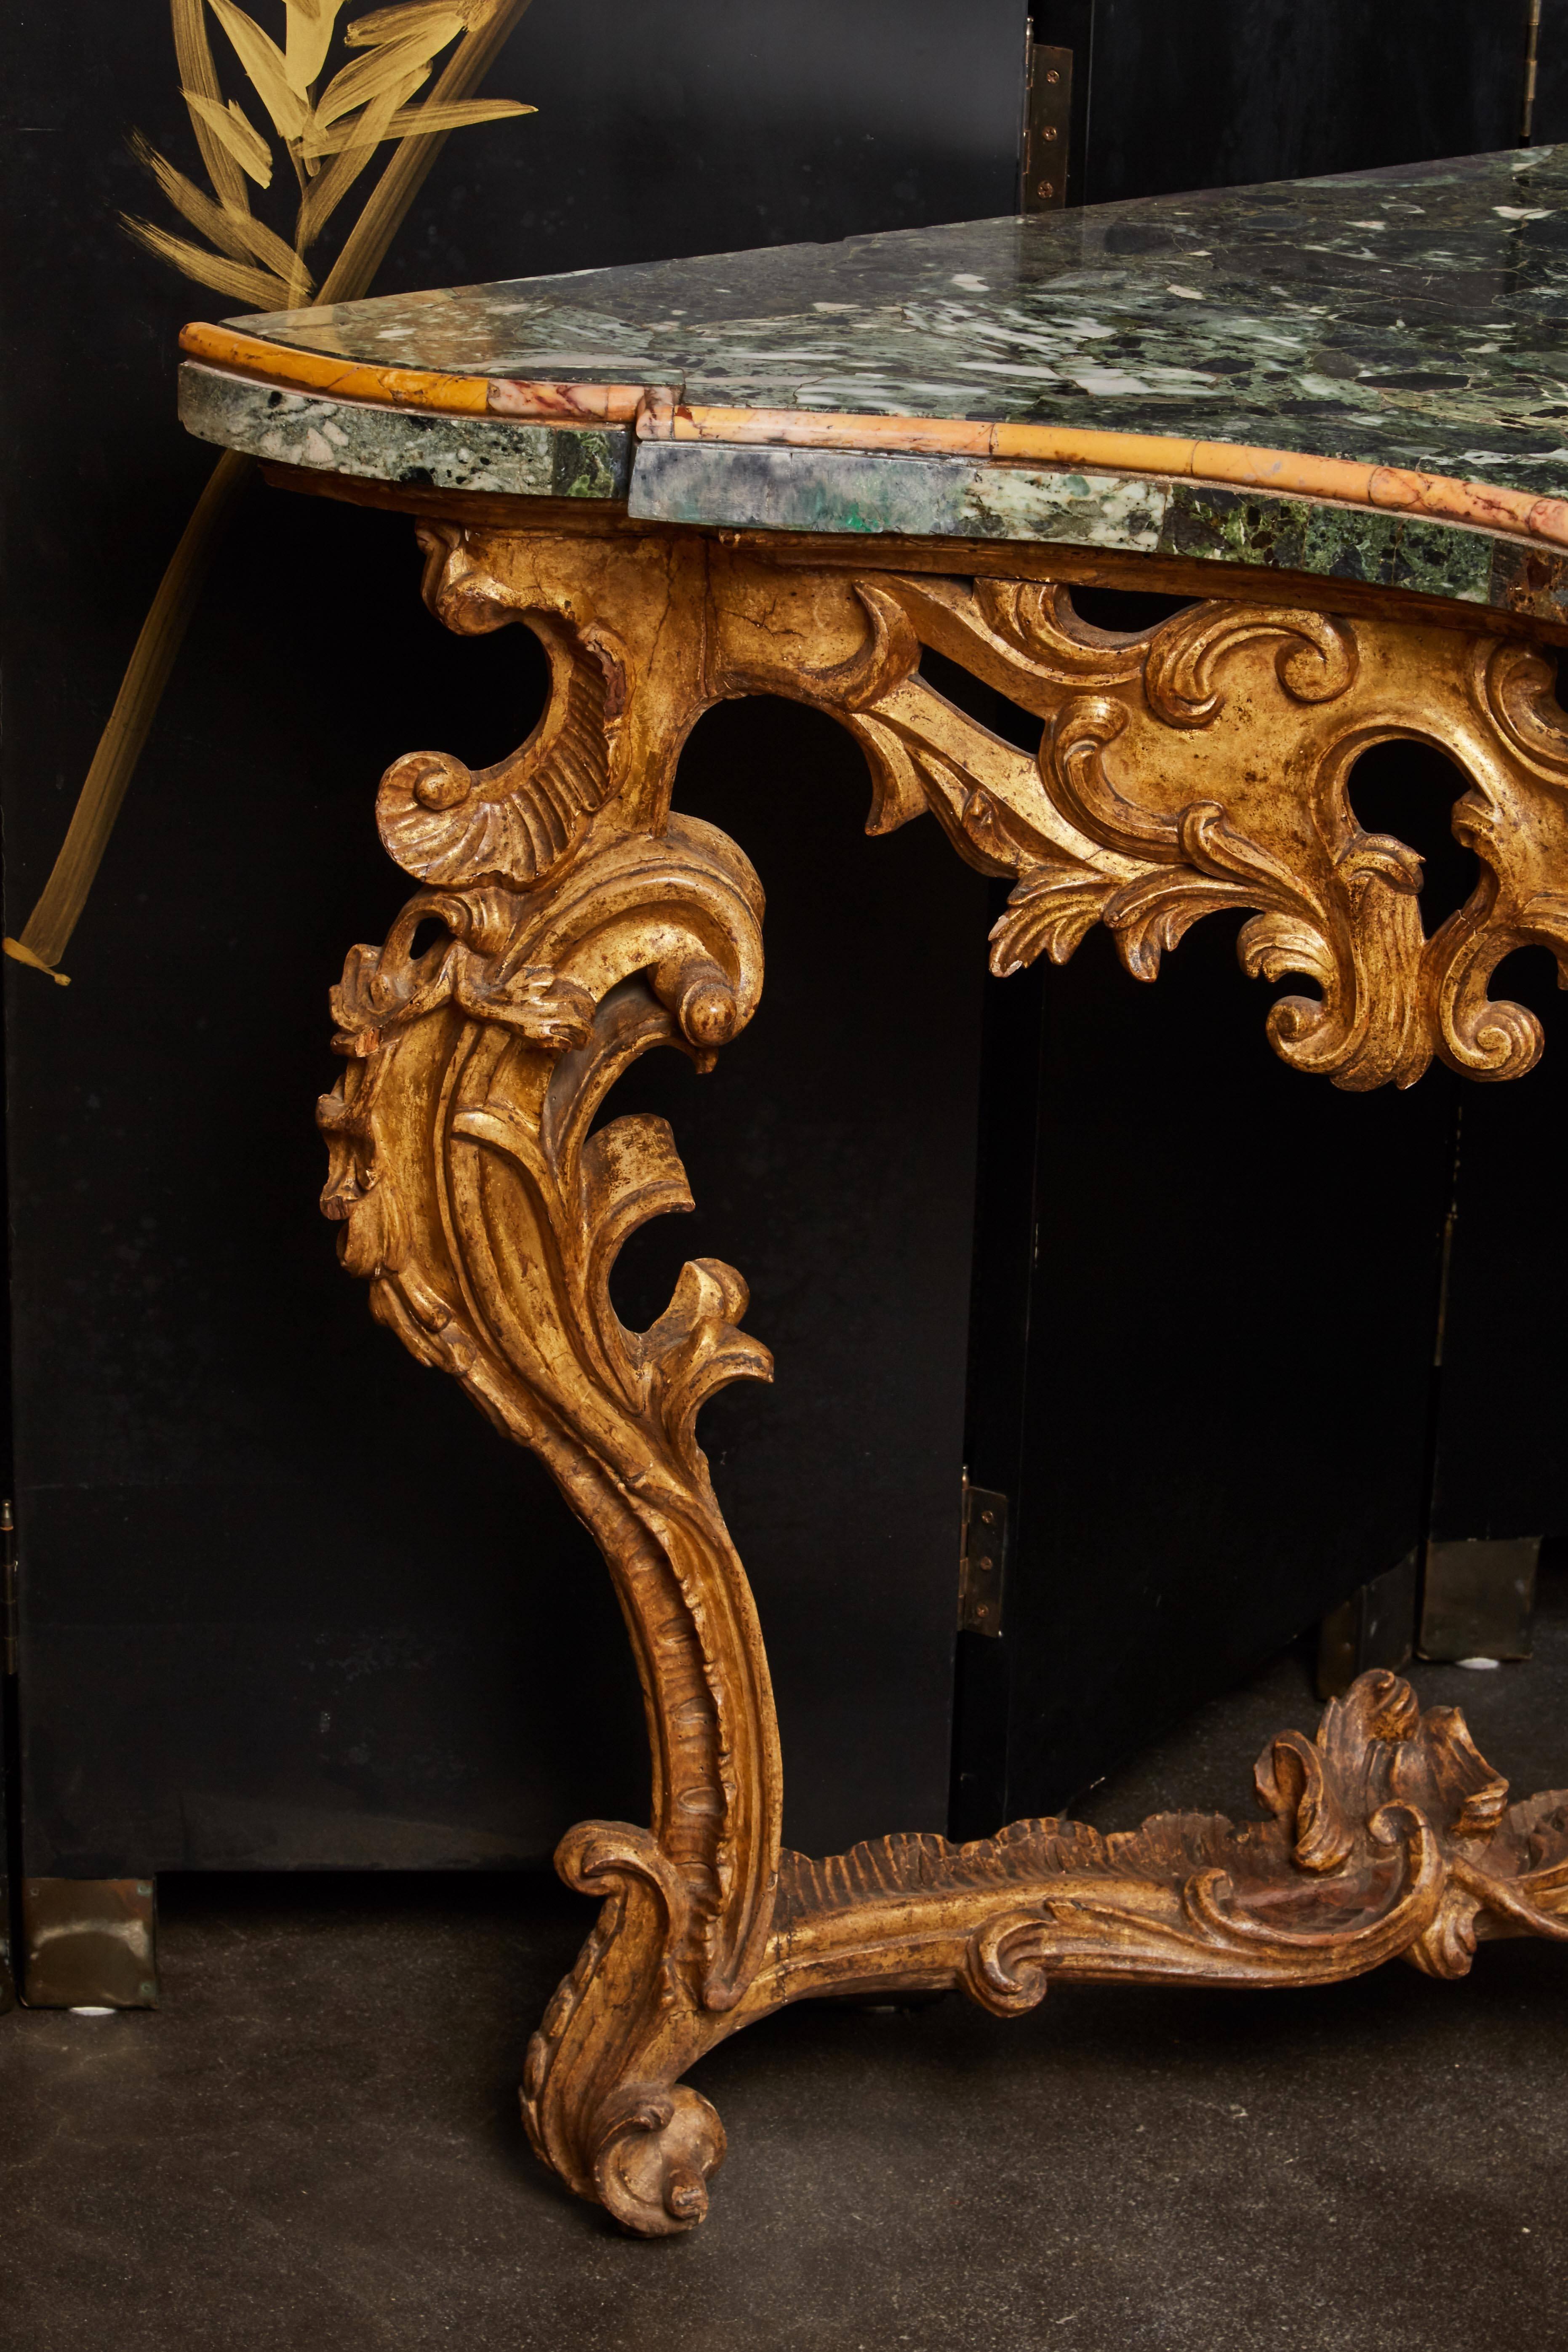 This very large mid-18th century Italian Rococo giltwood green marble top console having a modern marble top; the frame with pierced Giltwood carvings in high Rococo relief, with very large, carved foliage rocaille and scroll work to the apron, the